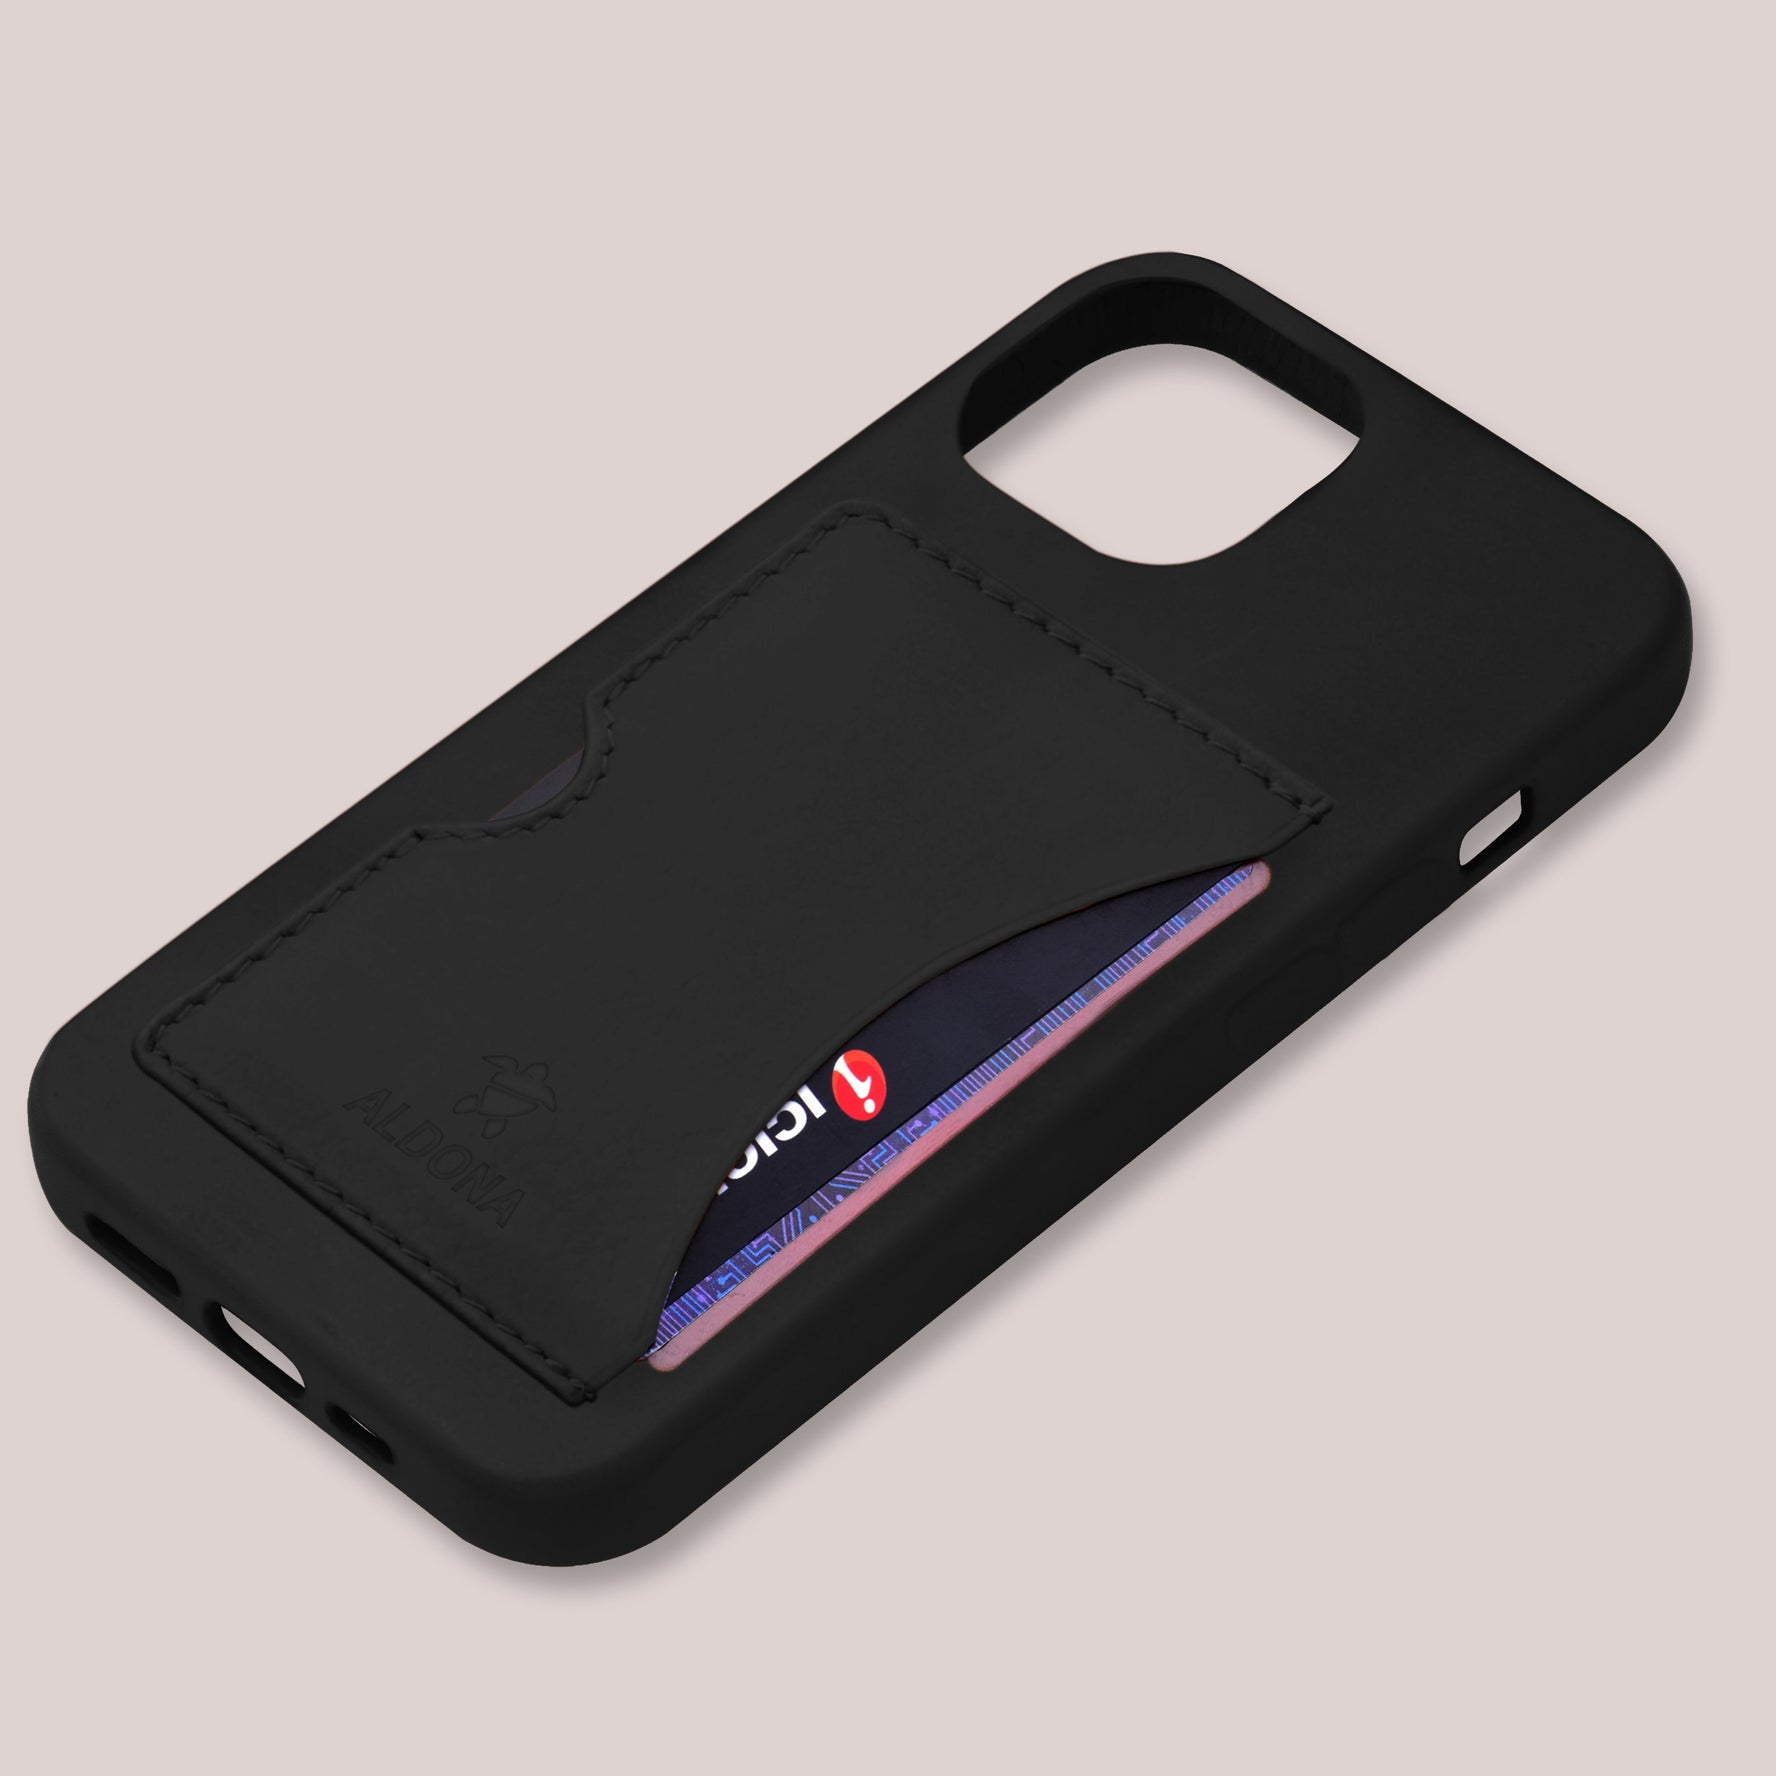 Baxter Card Case for iPhone 12 Series - Onyx Black